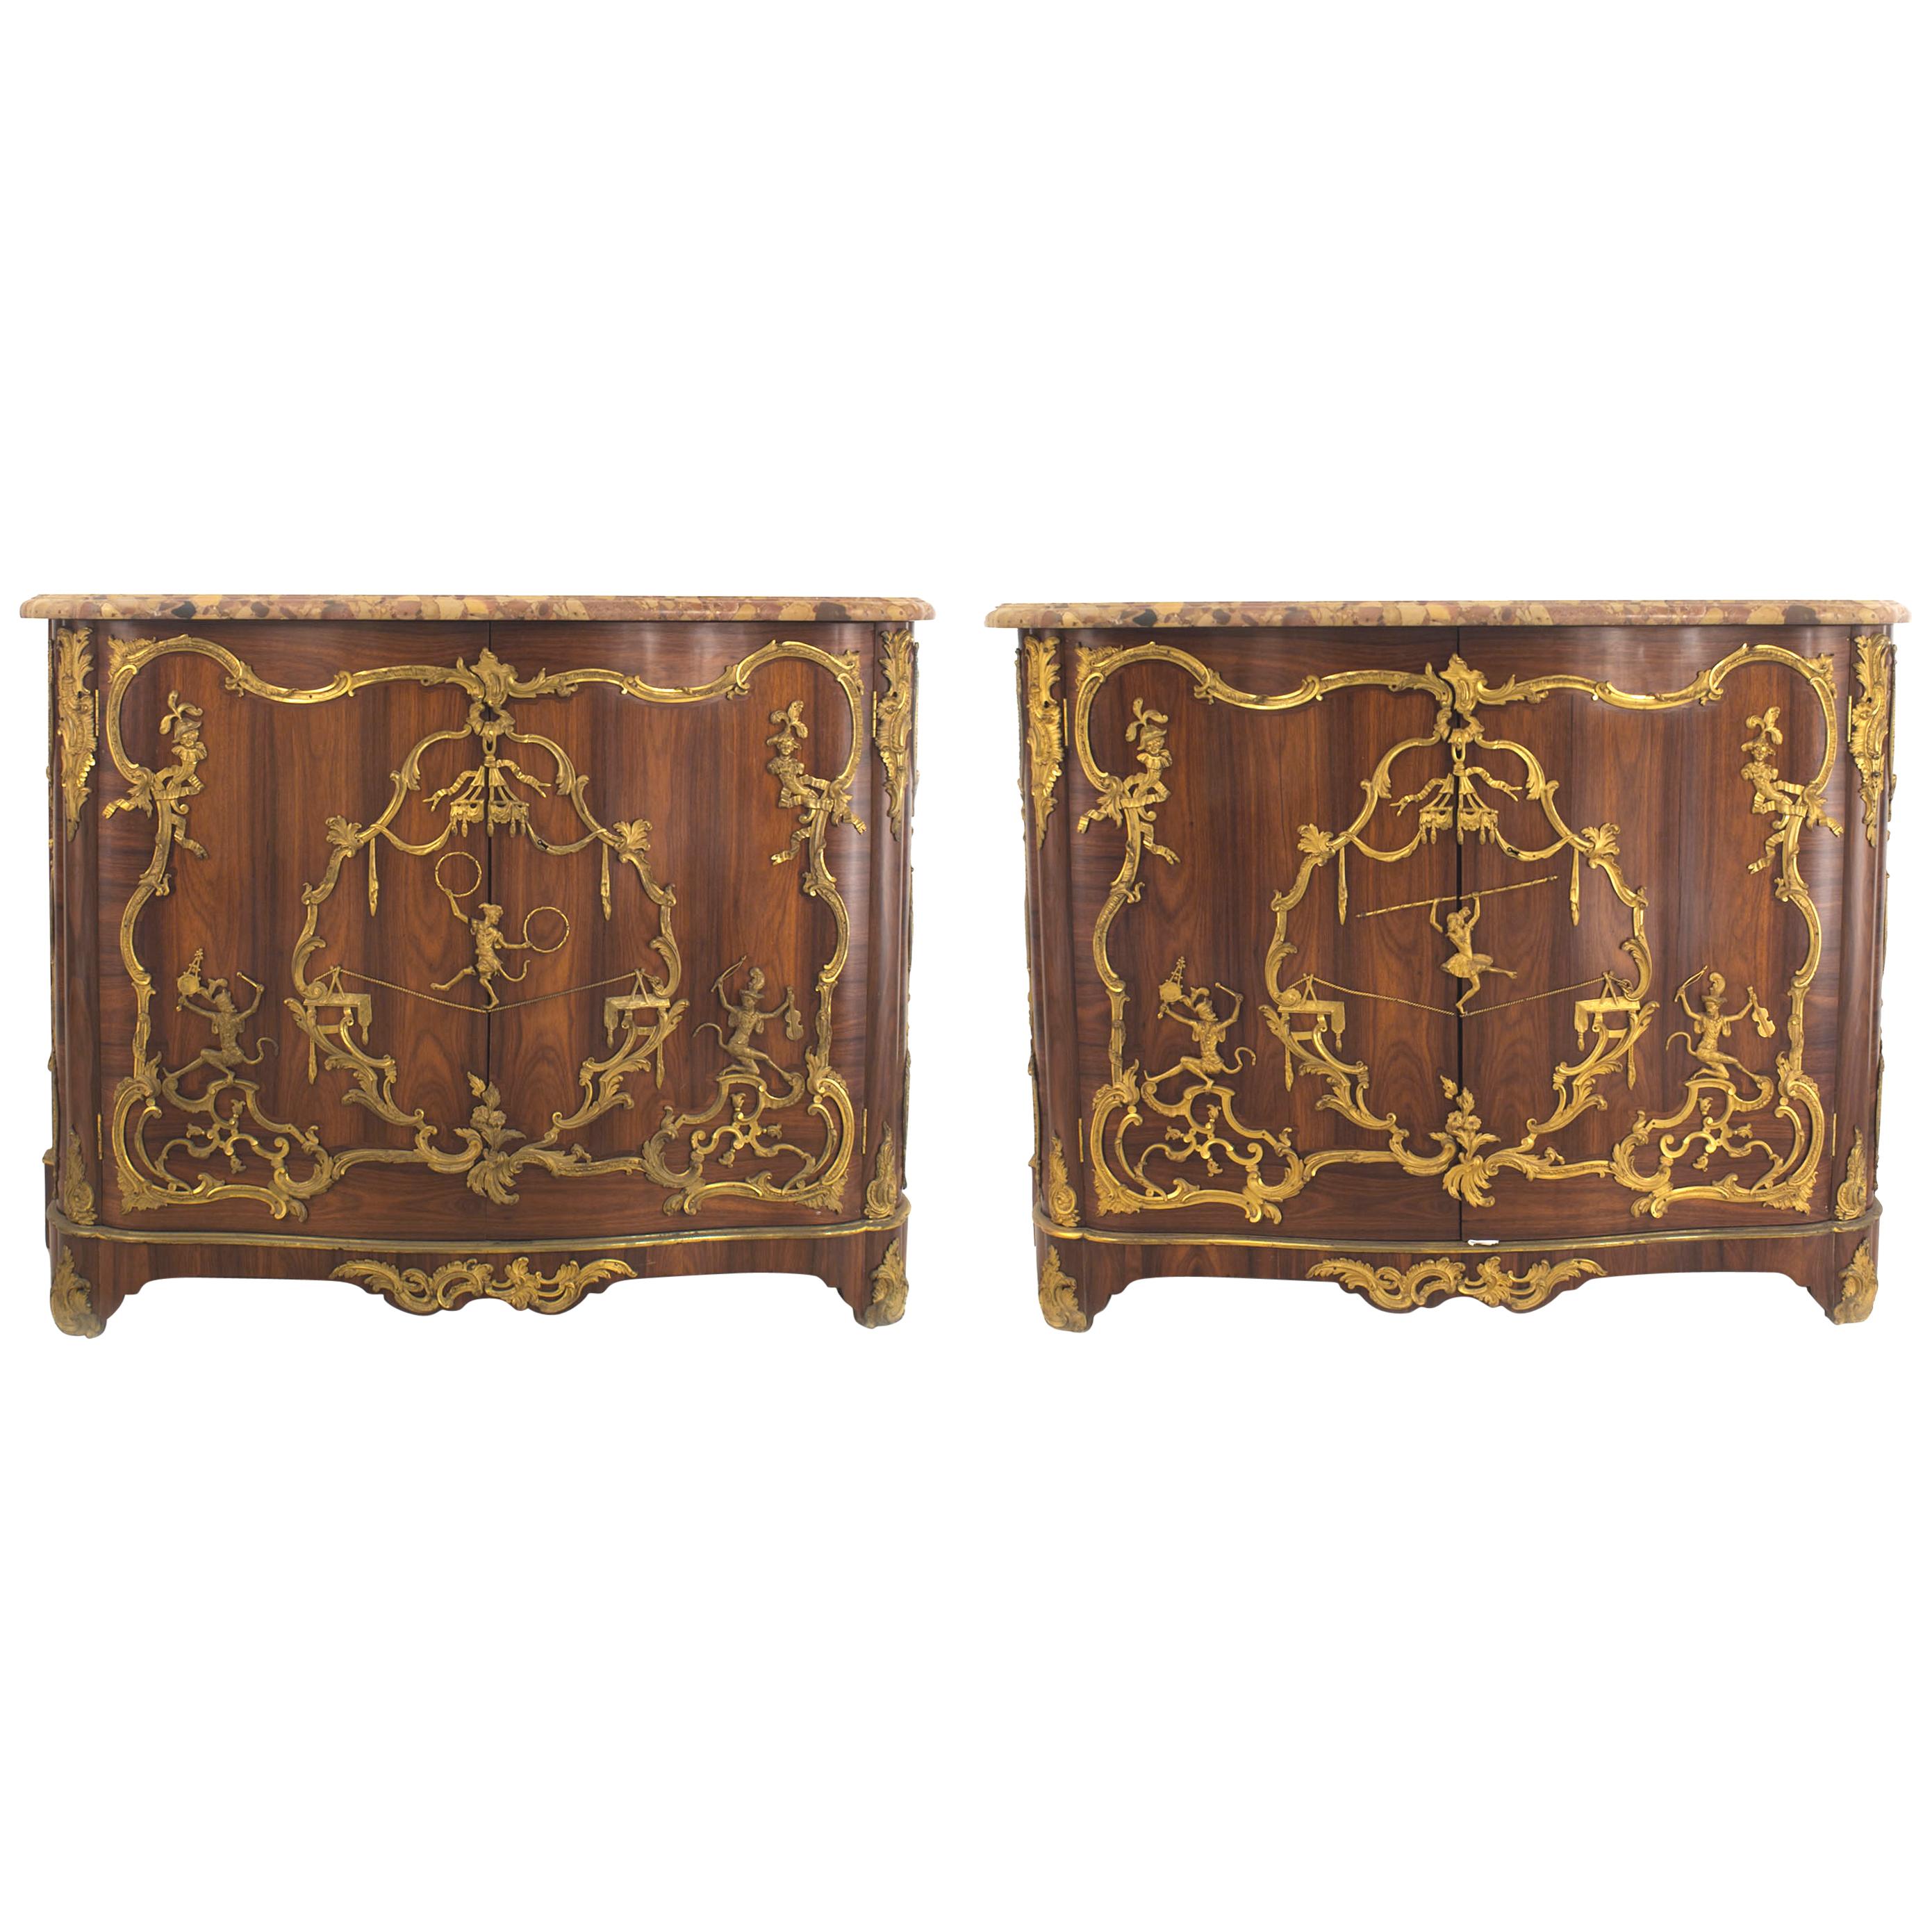 Pair of French Louis XV Style Late 19th Century Rosewood Commodes by Cressent